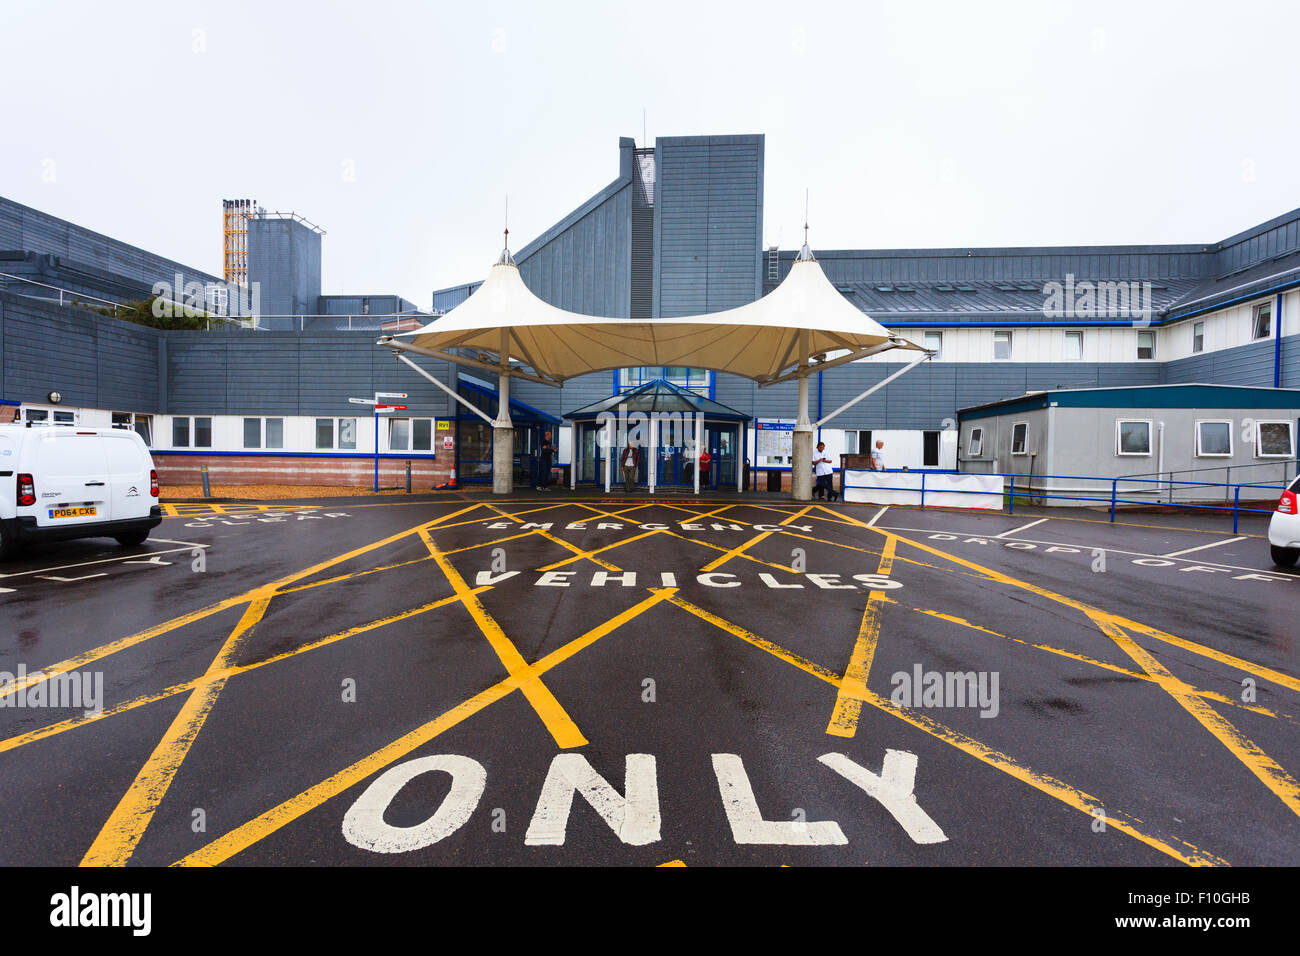 Emergency vehicles only cross hatching road markings outside hospital Stock Photo